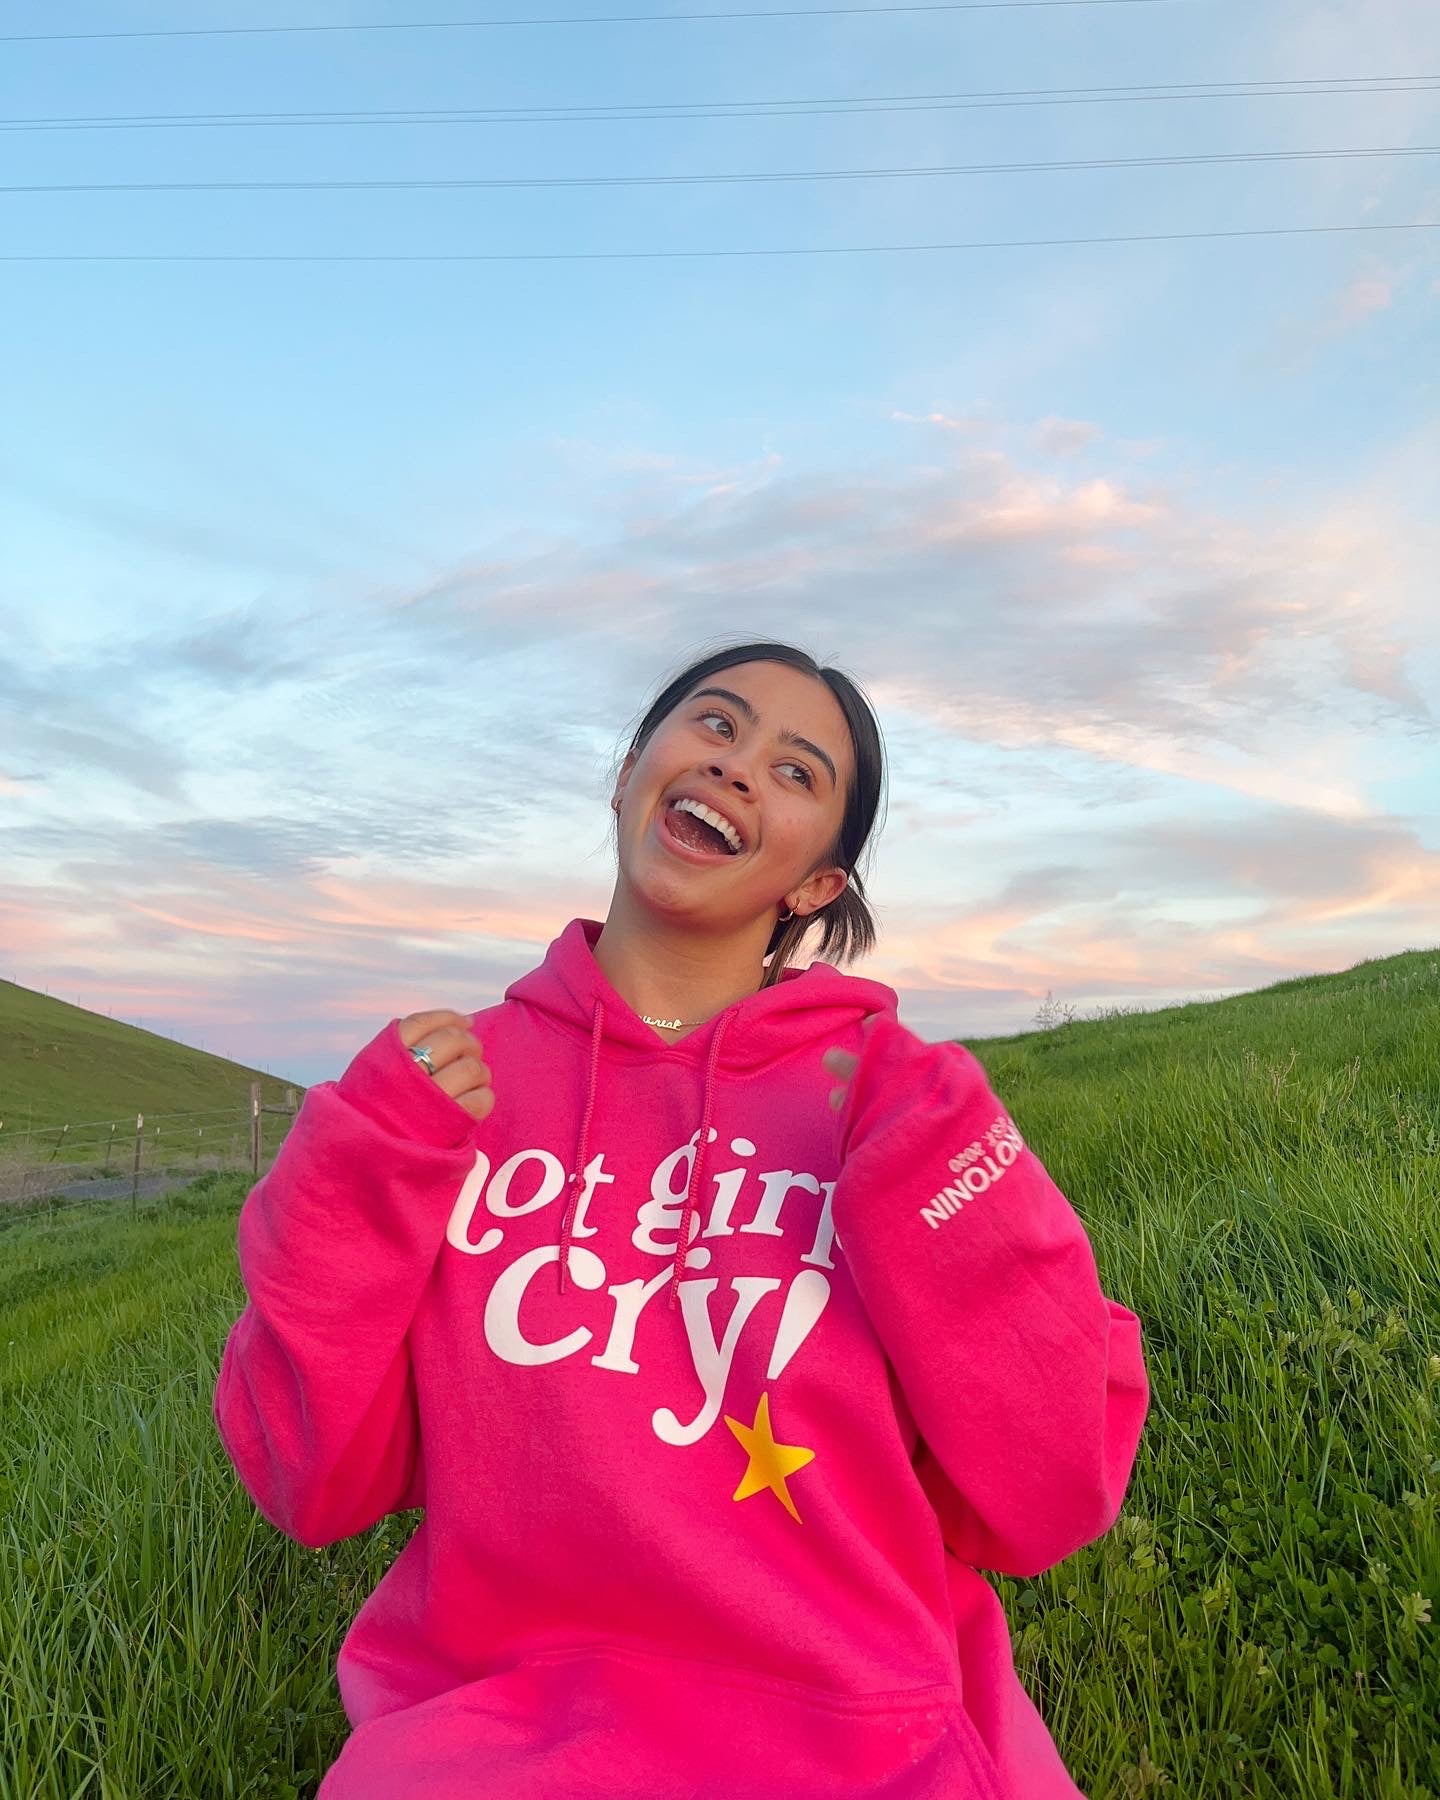 HOT GIRLS CRY PINK HOODIE